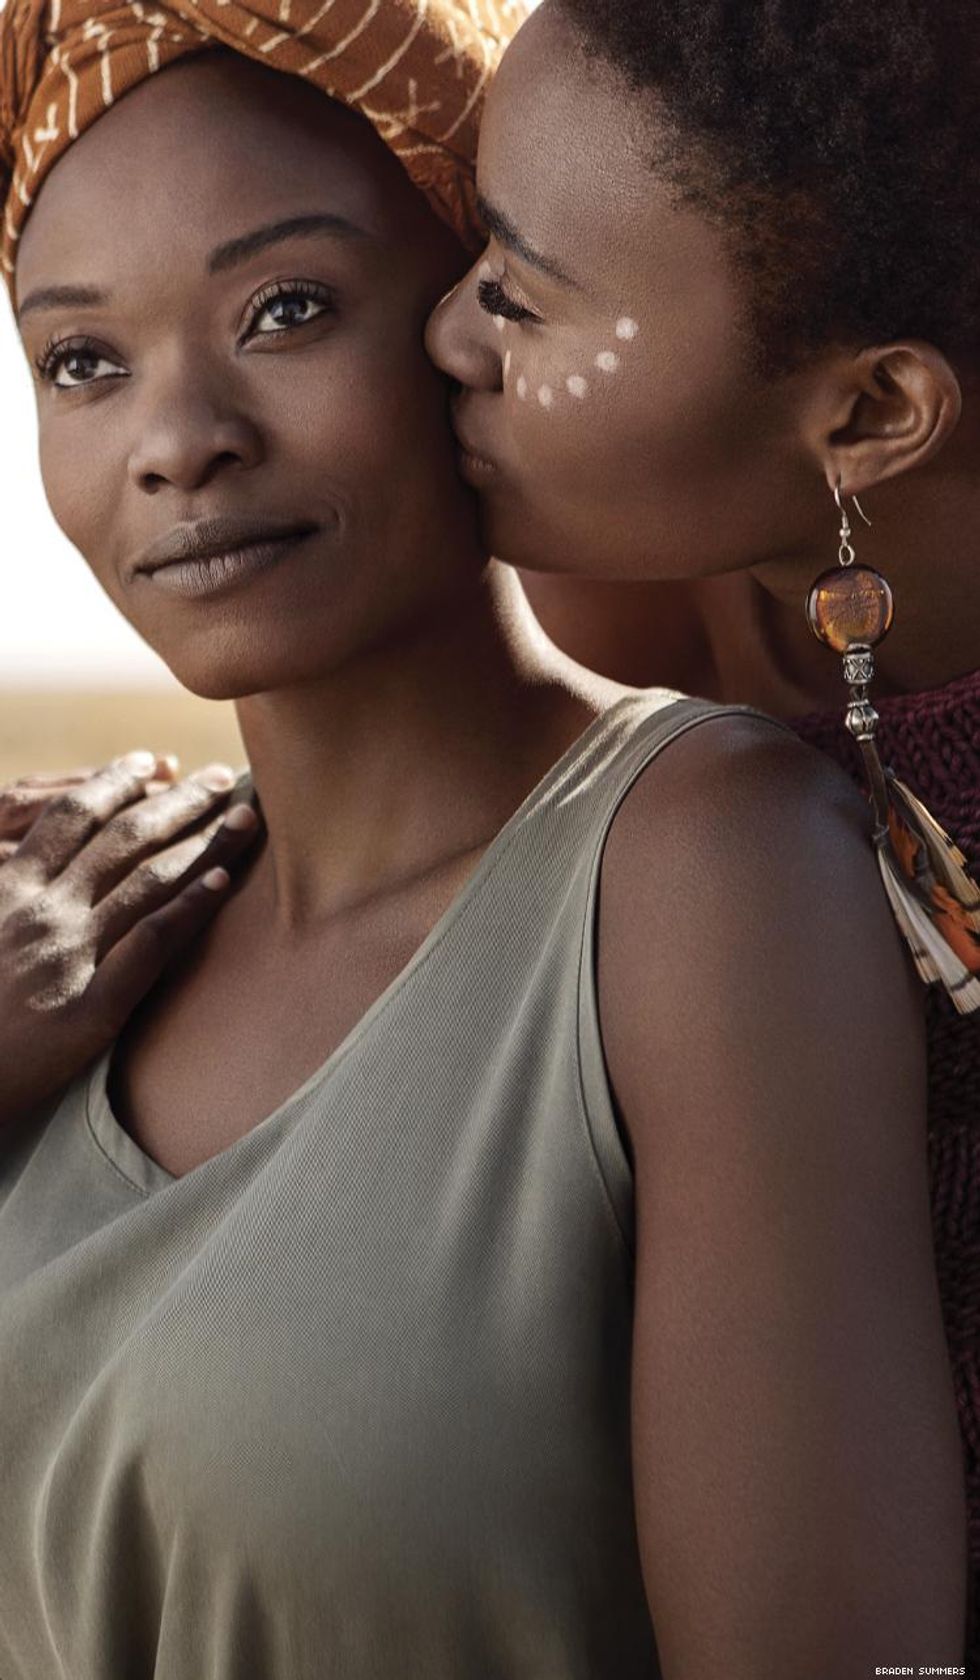 a South African lesbian couple by Braden Summers